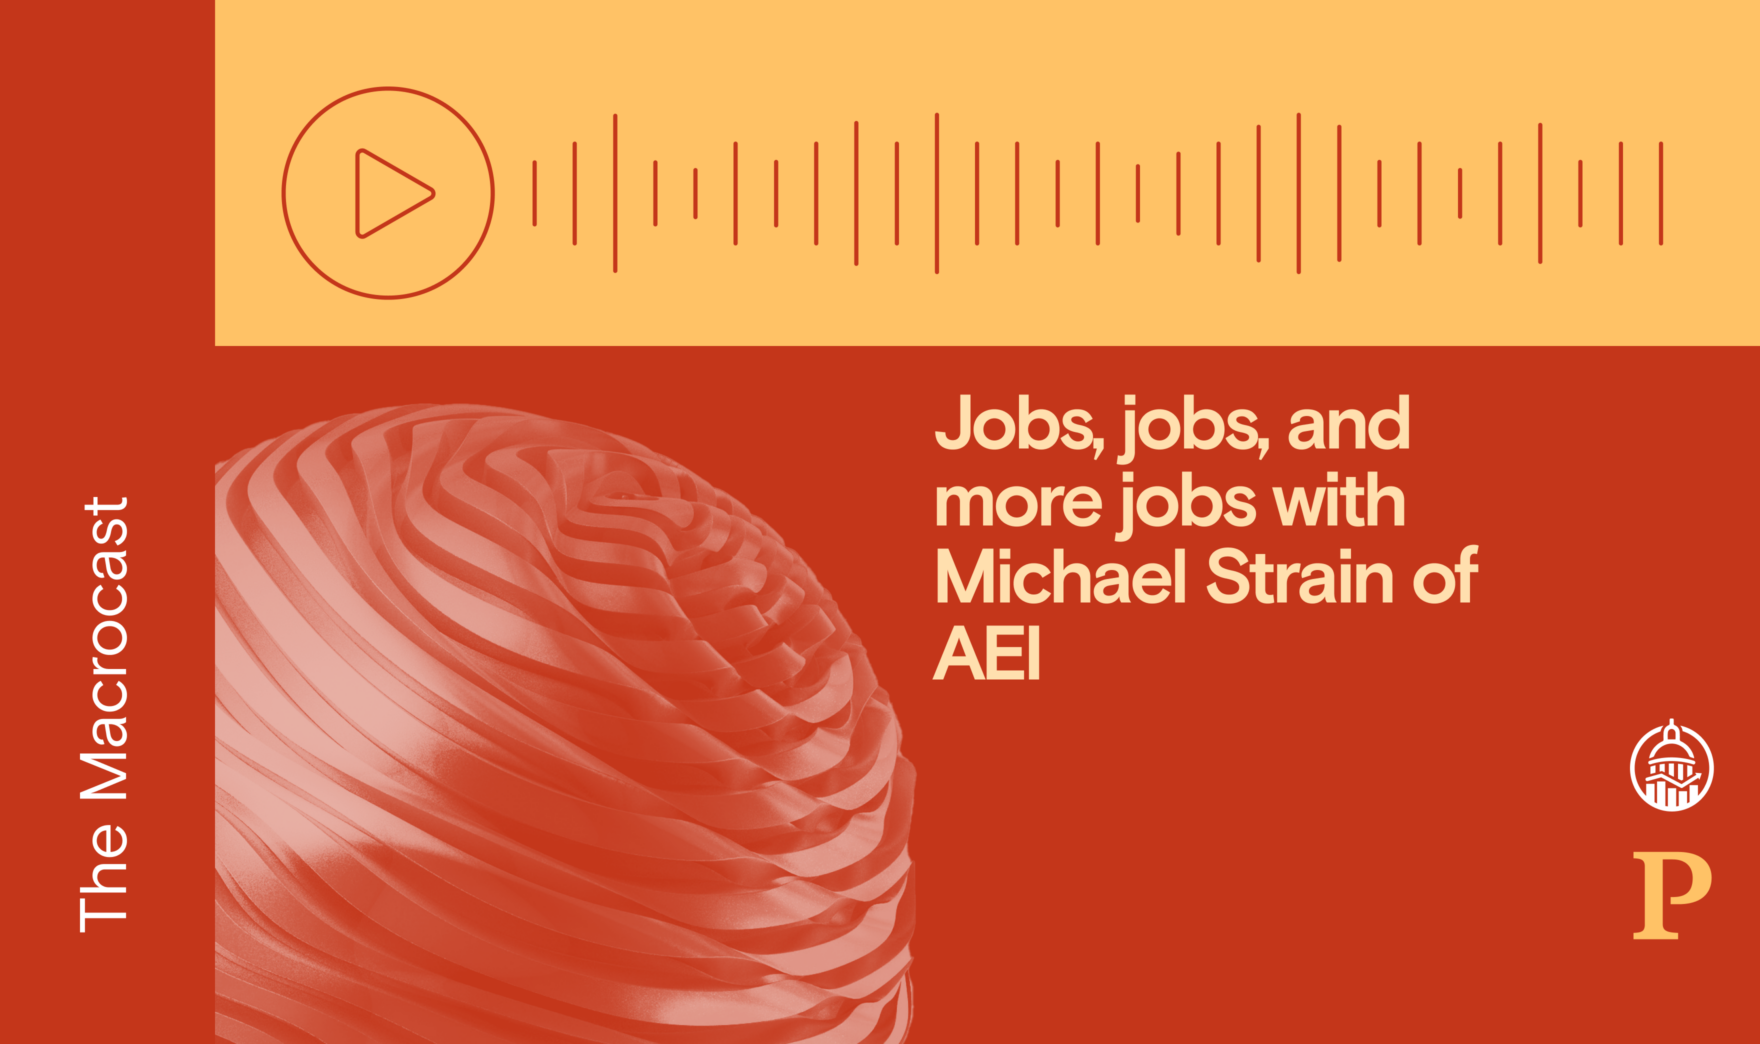 Macrocast: Jobs, jobs, and more jobs with Michael Strain of AEI